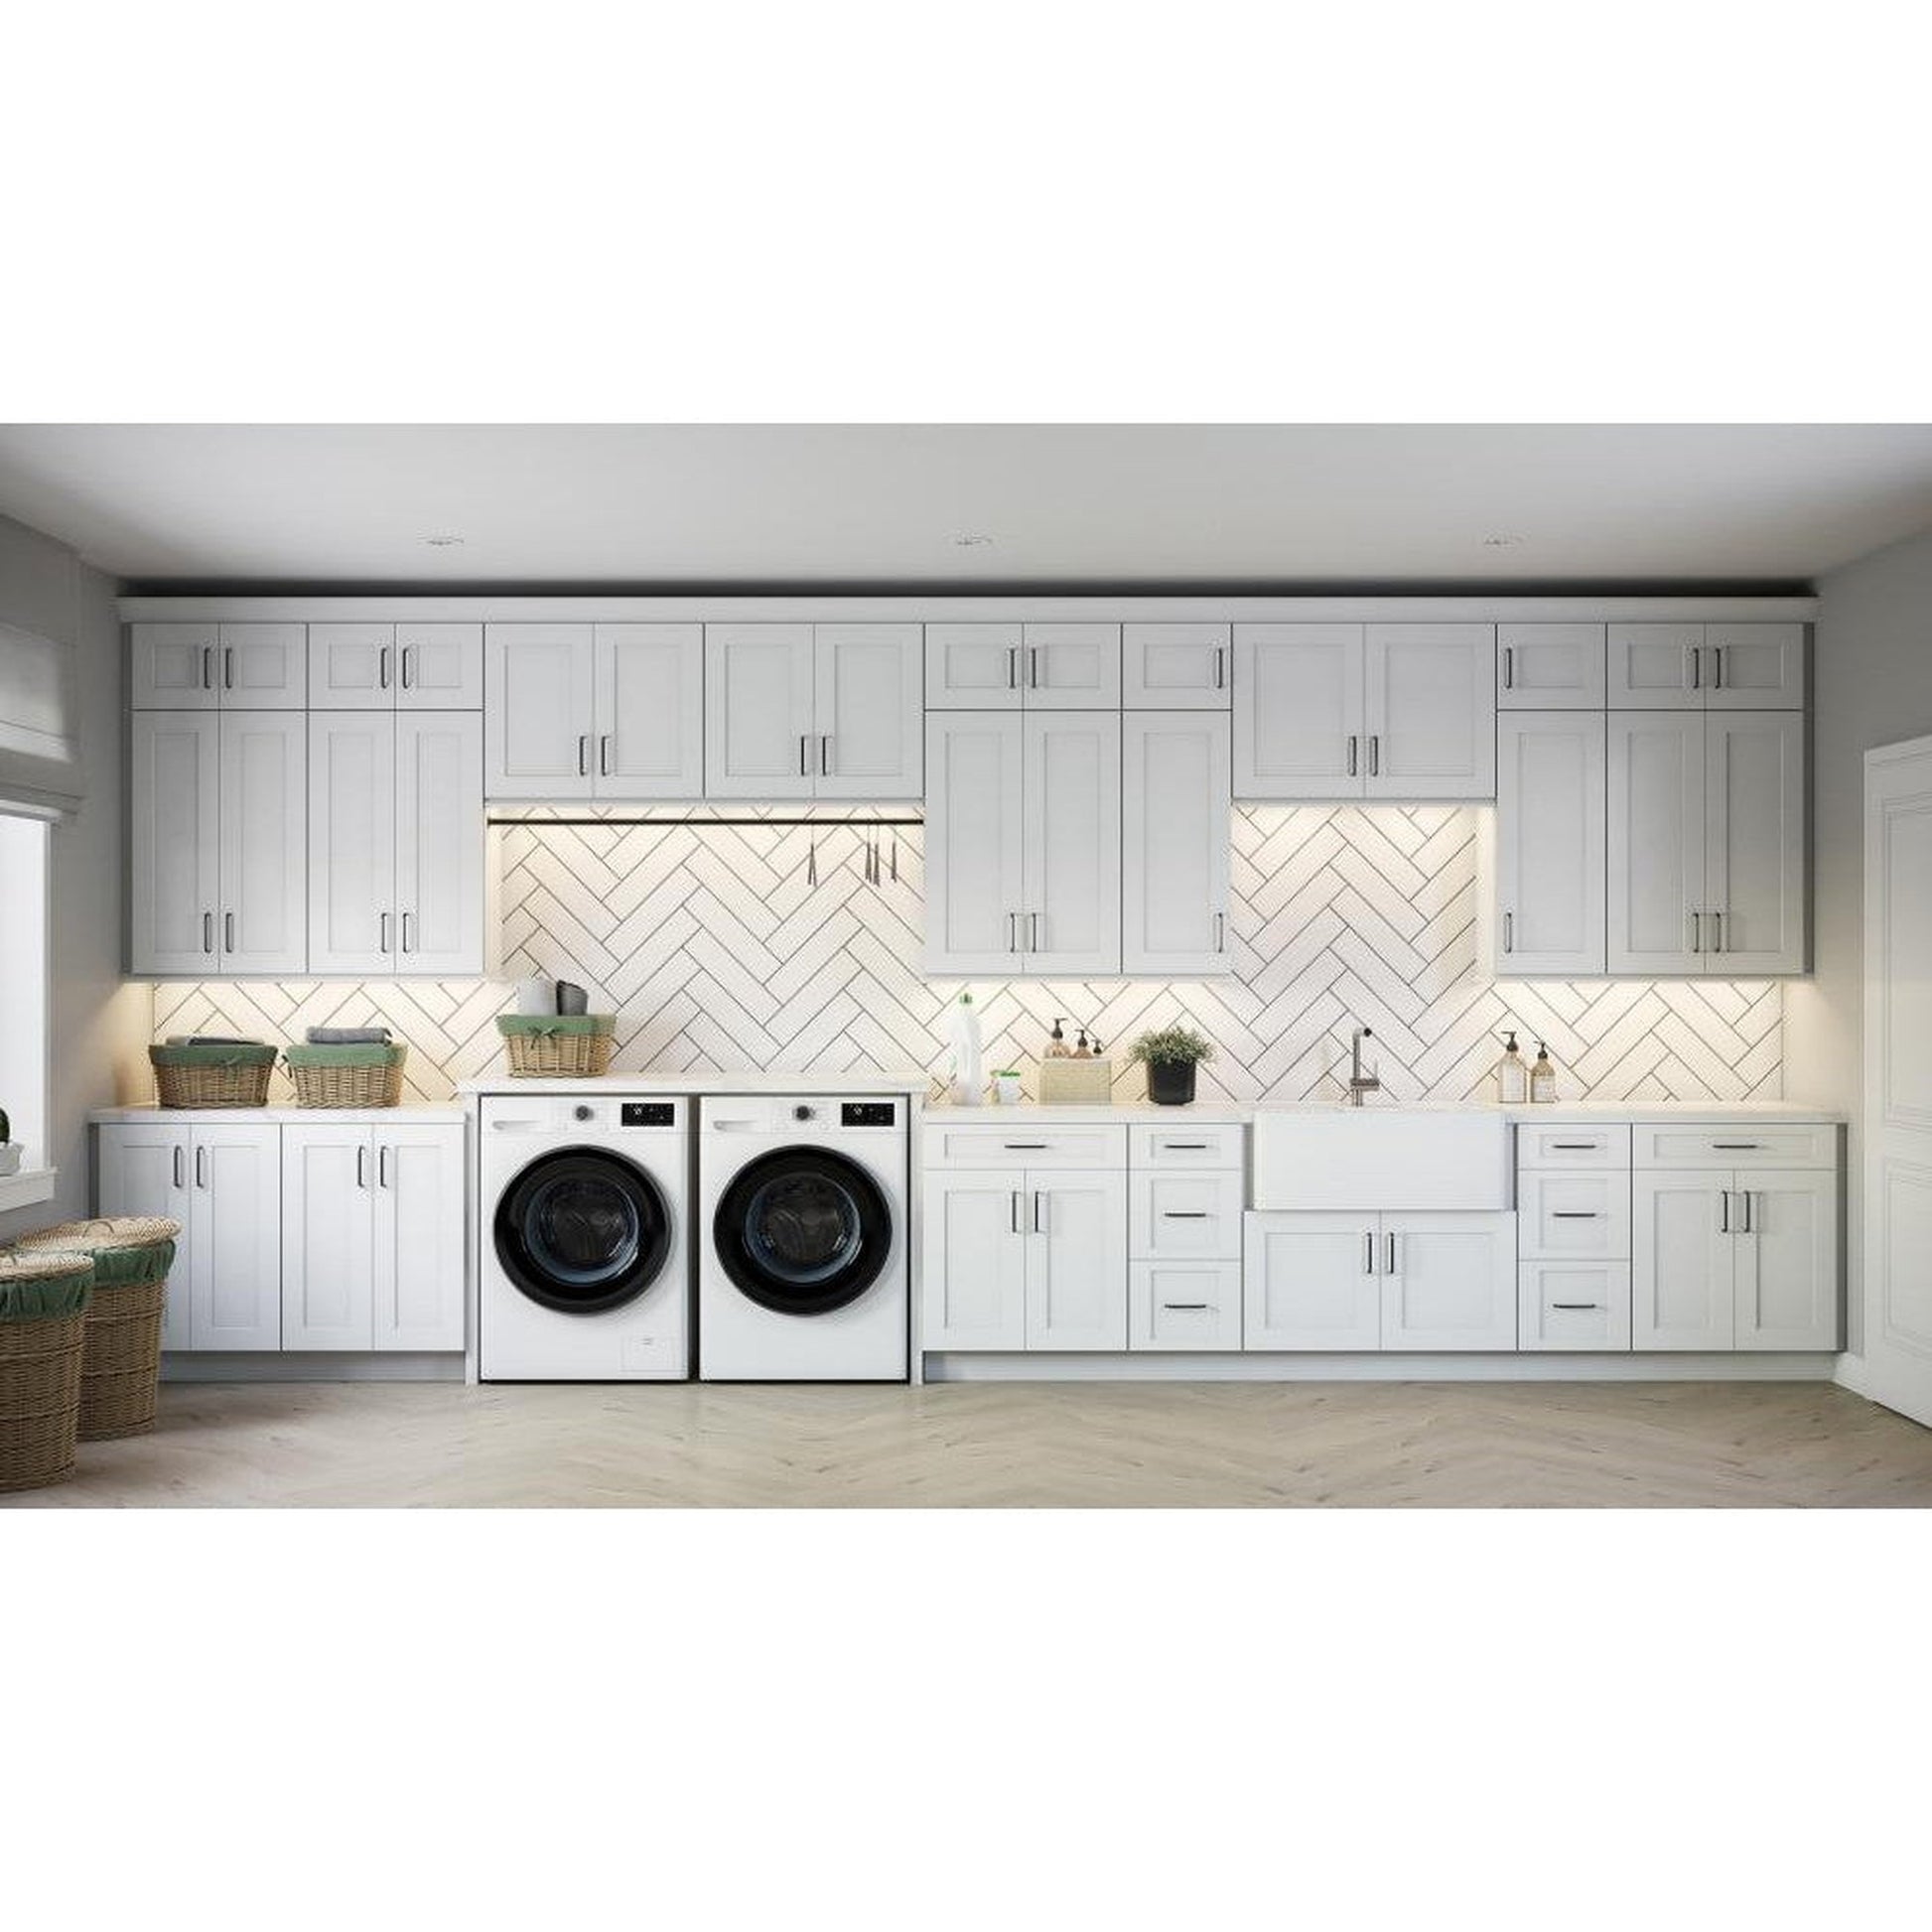 RTA Frosted White Shaker 48" Vanity Sink Base Cabinet with Drawers with 2 Decorative End Panels